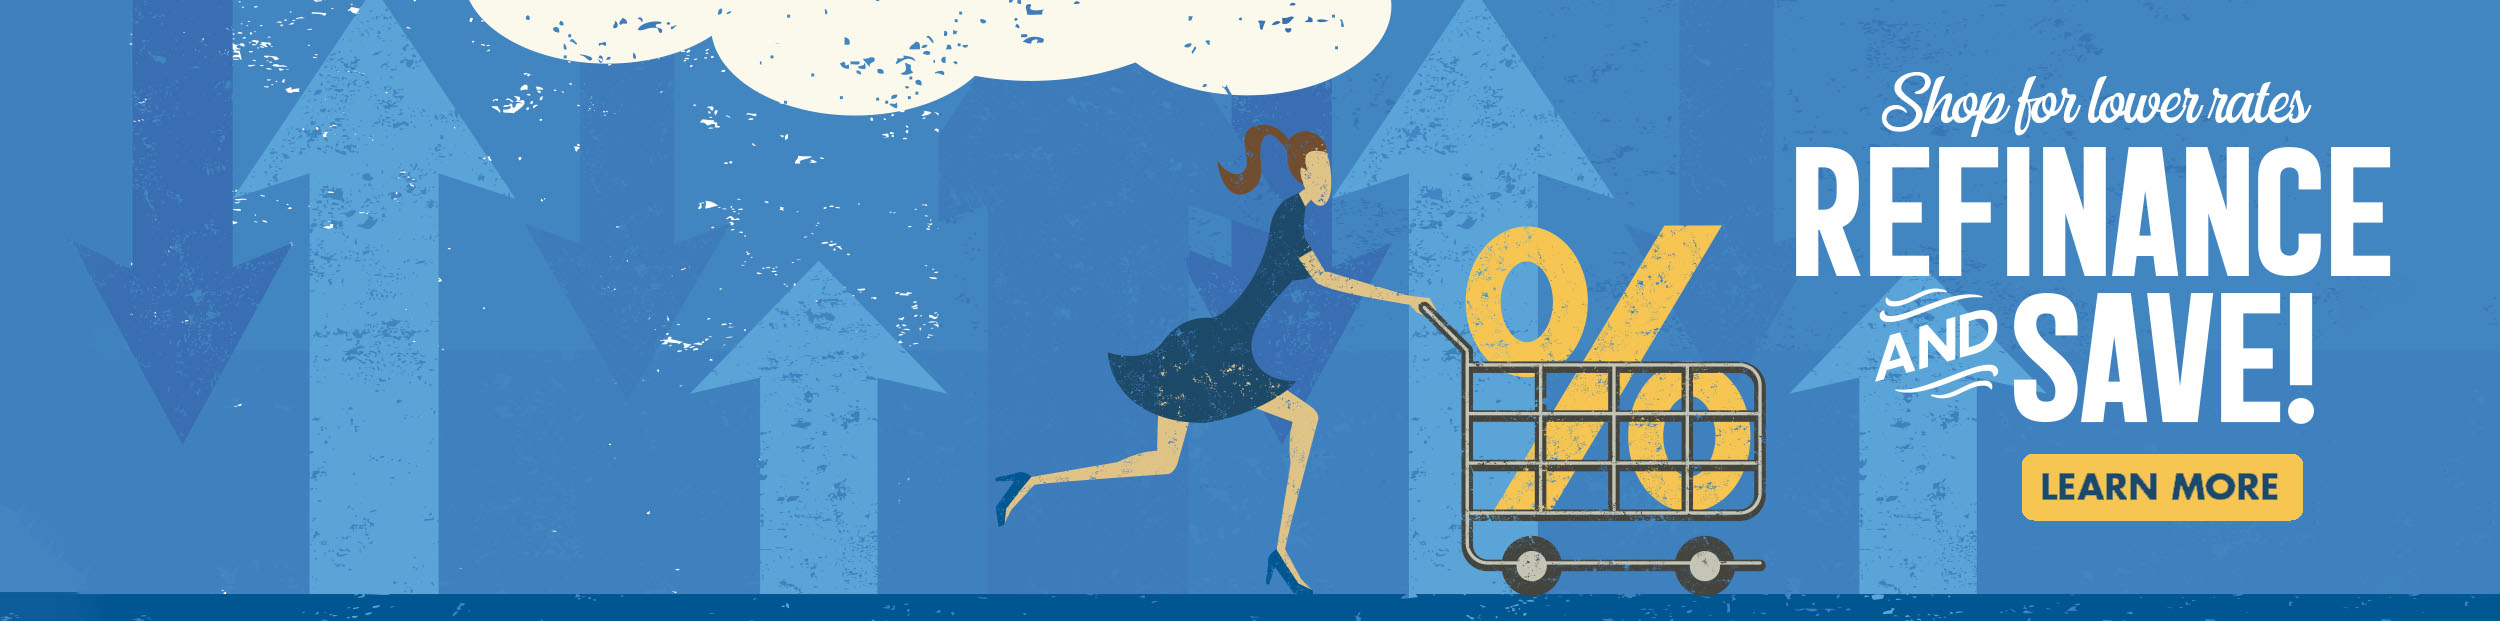 Cartoon woman in a blue dress running with a shopping cart that has a yellow percent symbol in it.